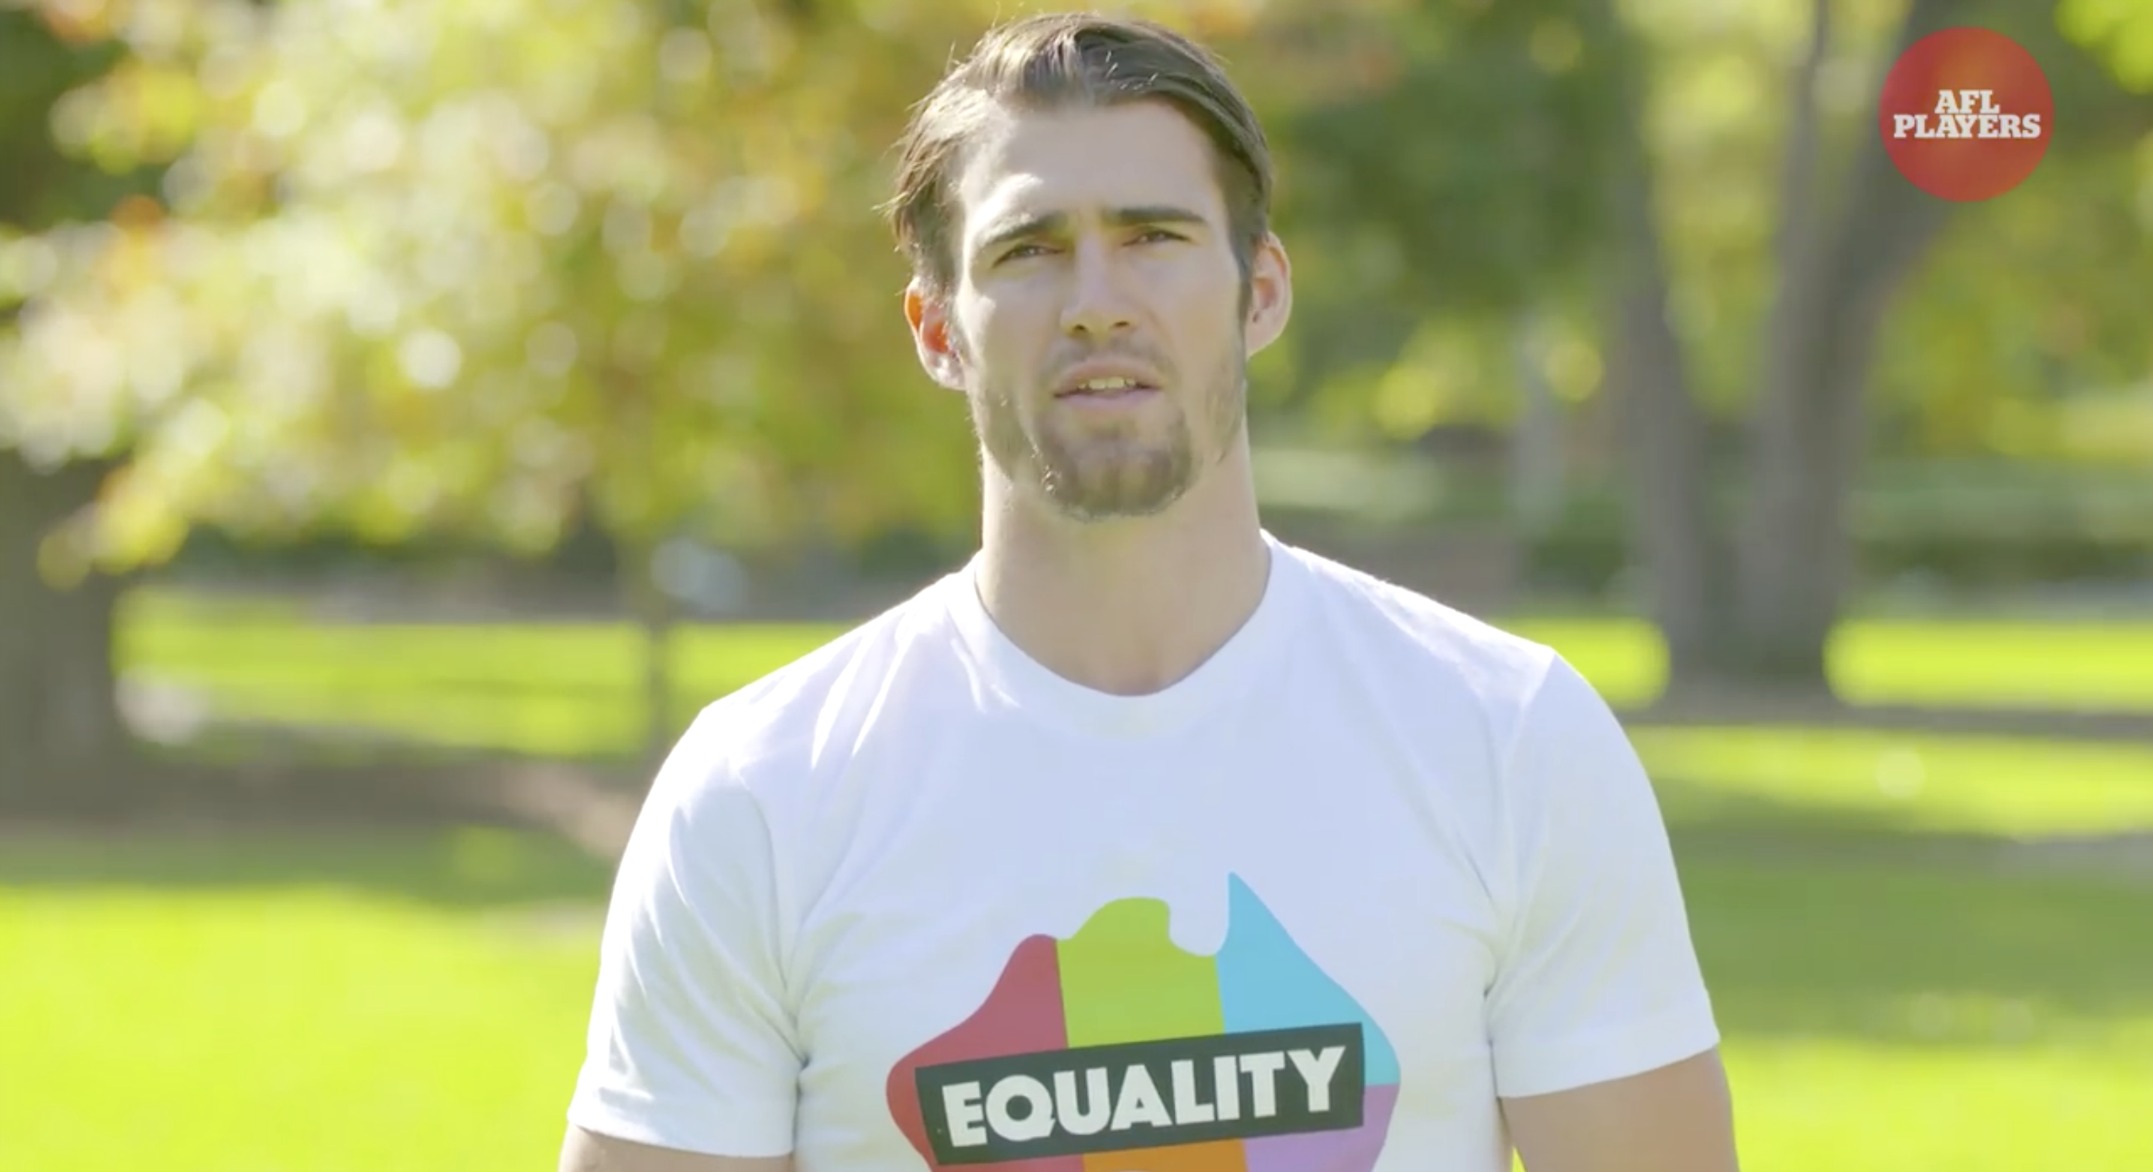 AFL players sign petition supporting marriage equality